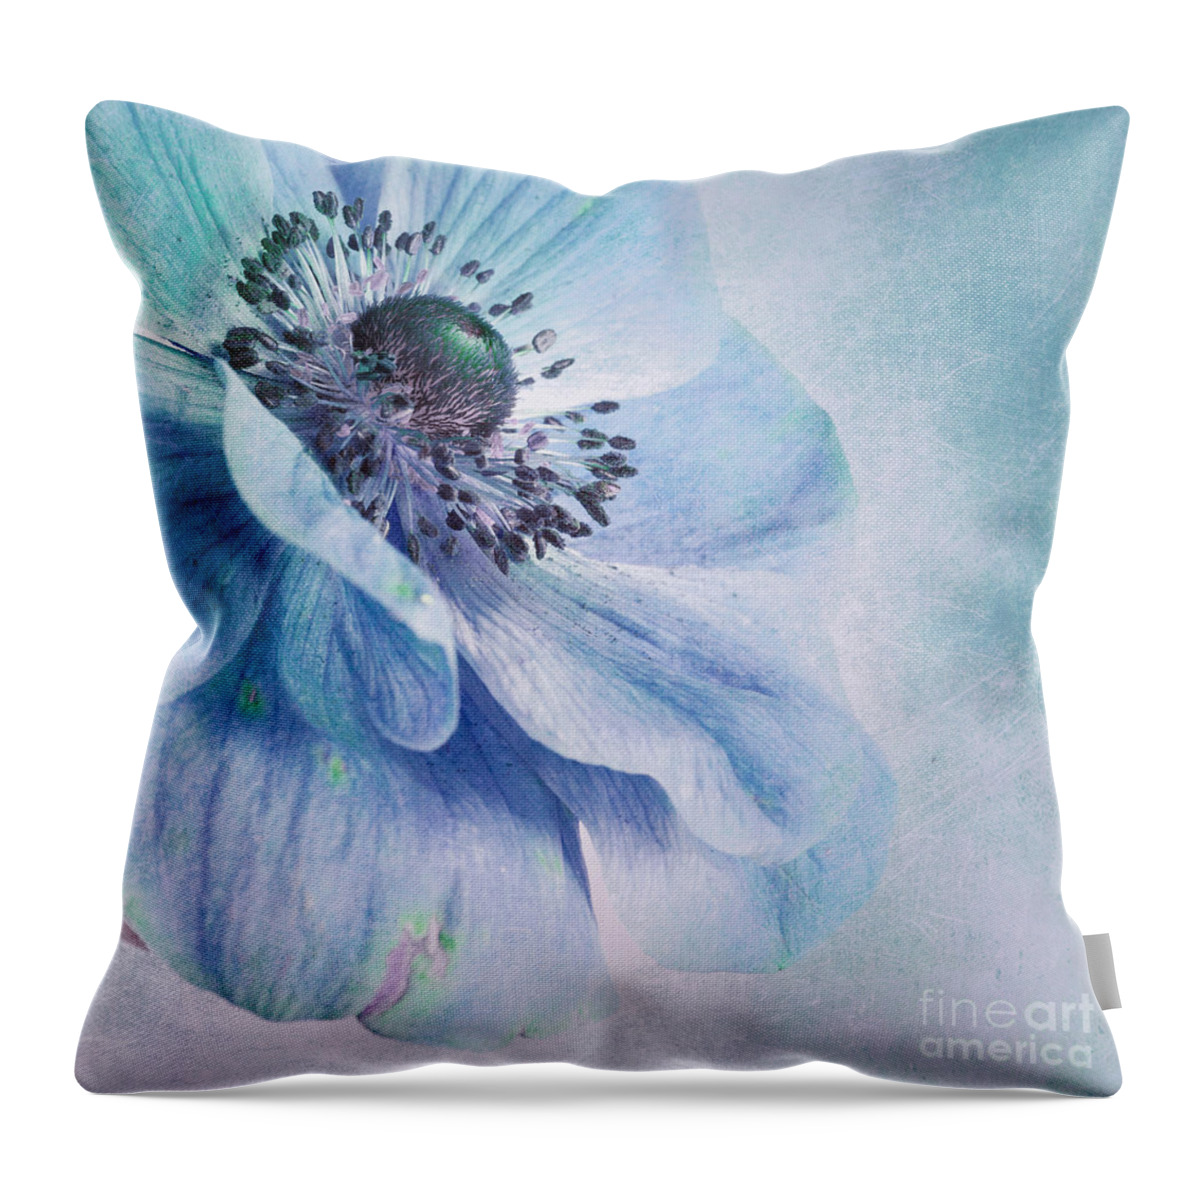 Blue Throw Pillow featuring the photograph Shades Of Blue by Priska Wettstein